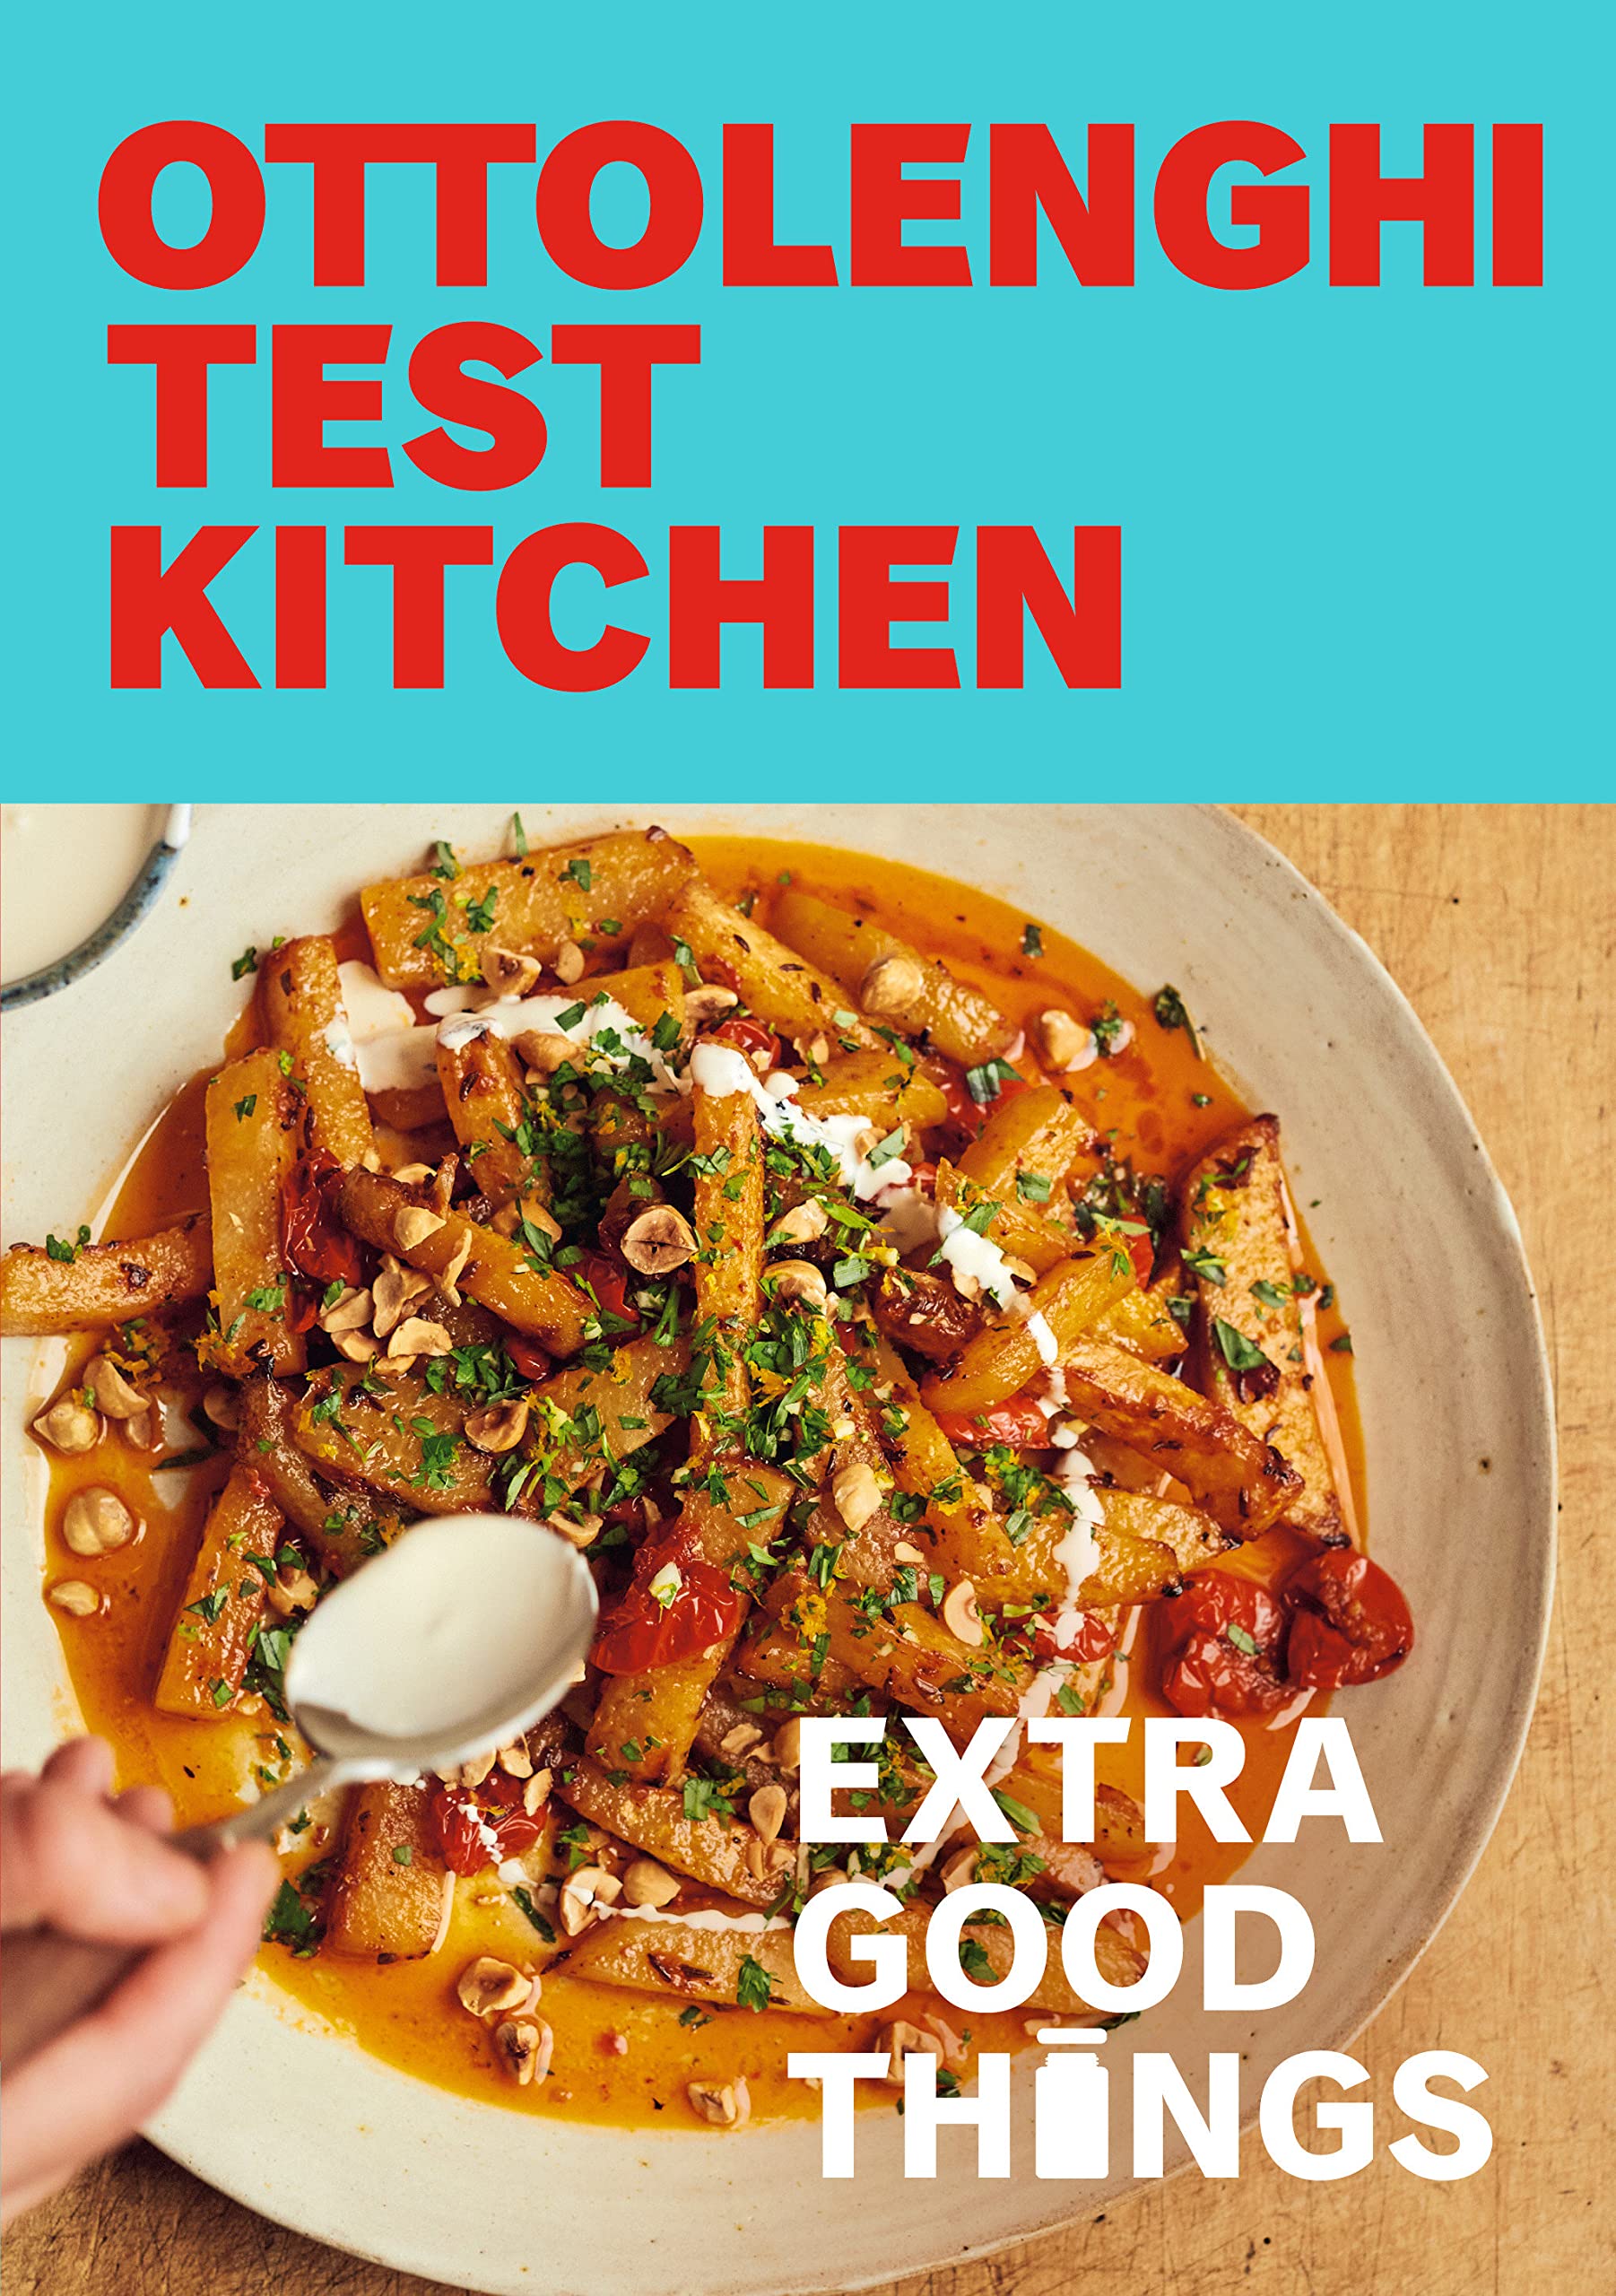 Ottolenghi Test Kitchen: Extra Good Things: Bold, Vegetable-Forward Recipes Plus Homemade Sauces, Condiments, and More to Build a Flavor-Packed Pantry (Noor Murad, Yotam Ottolenghi) *Signed*